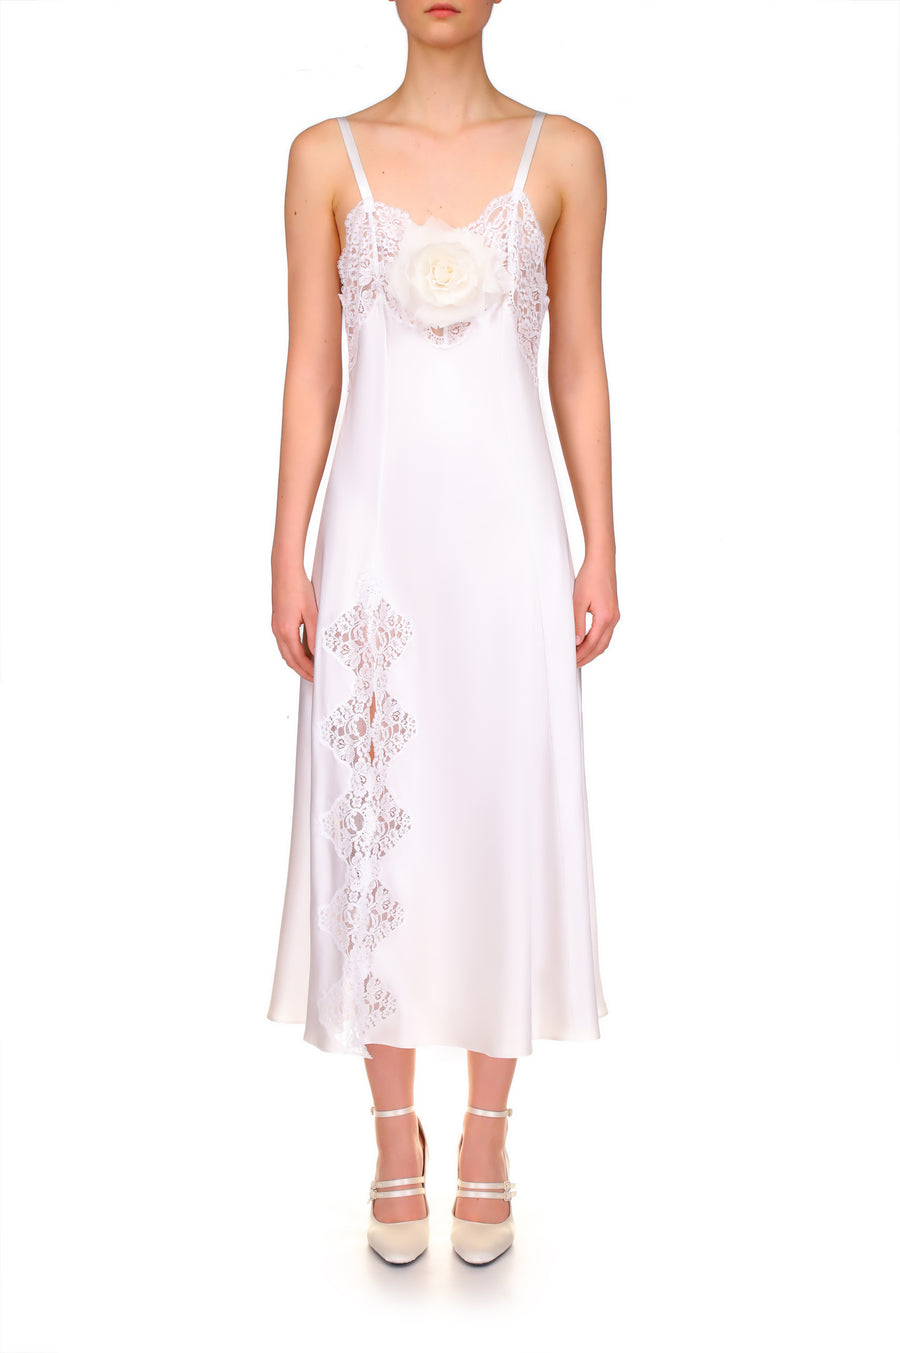 White Silk Satin And Lace Bias Slip Dress With Slit and Rose